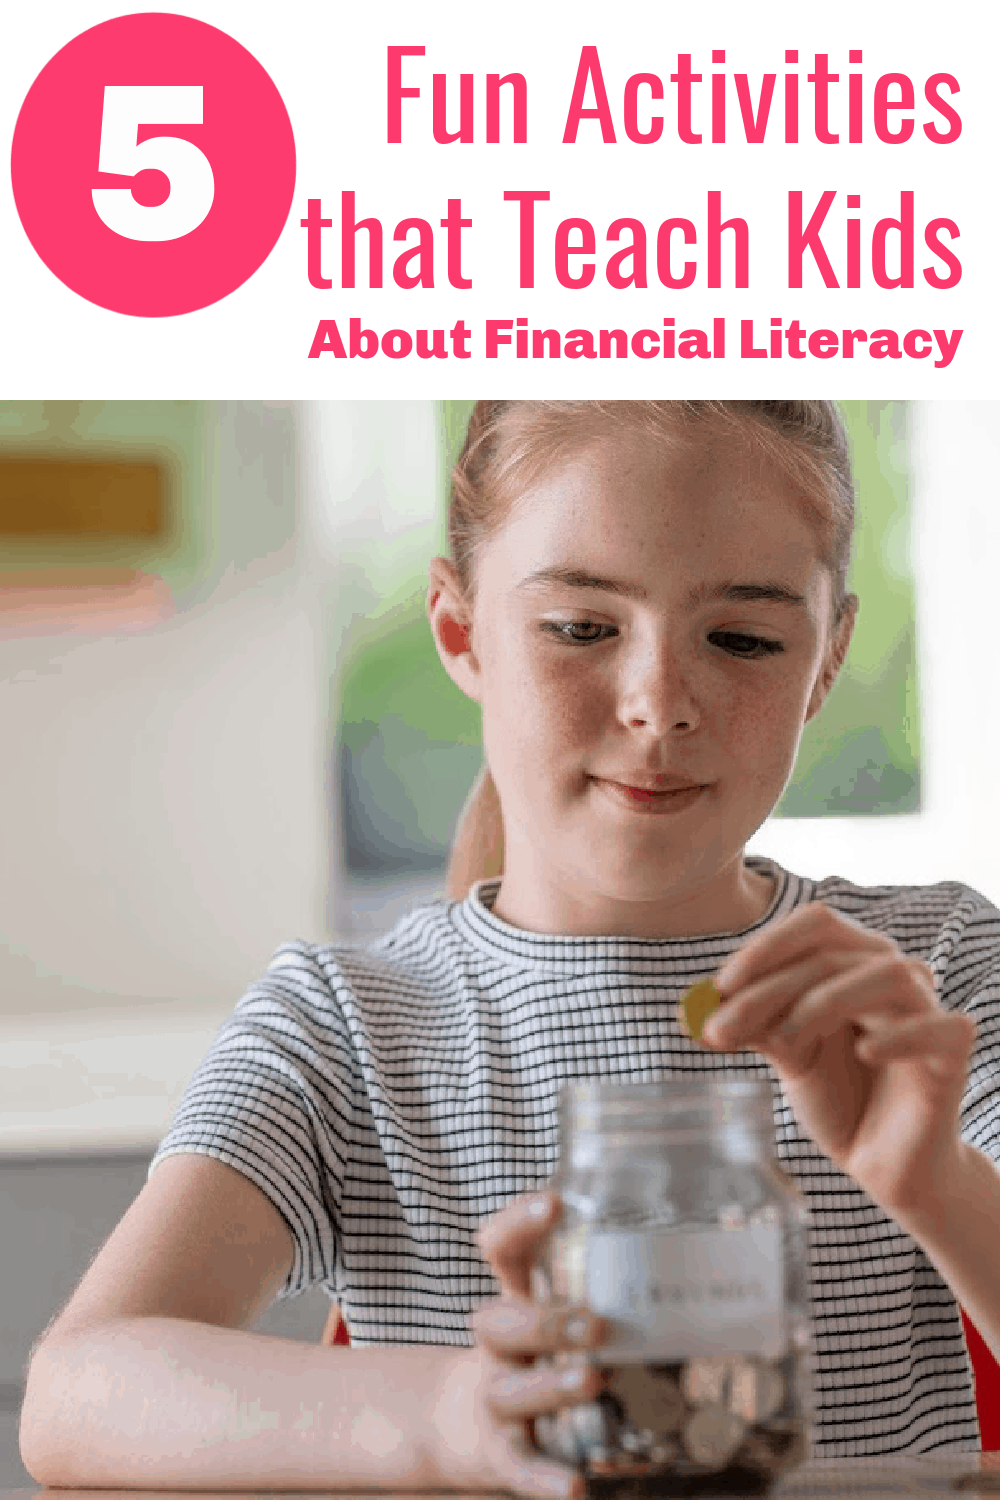 Looking for ways to make learning about financial literacy more fun for your kids? Check out these free printable worksheets, plus tips on how to use them!